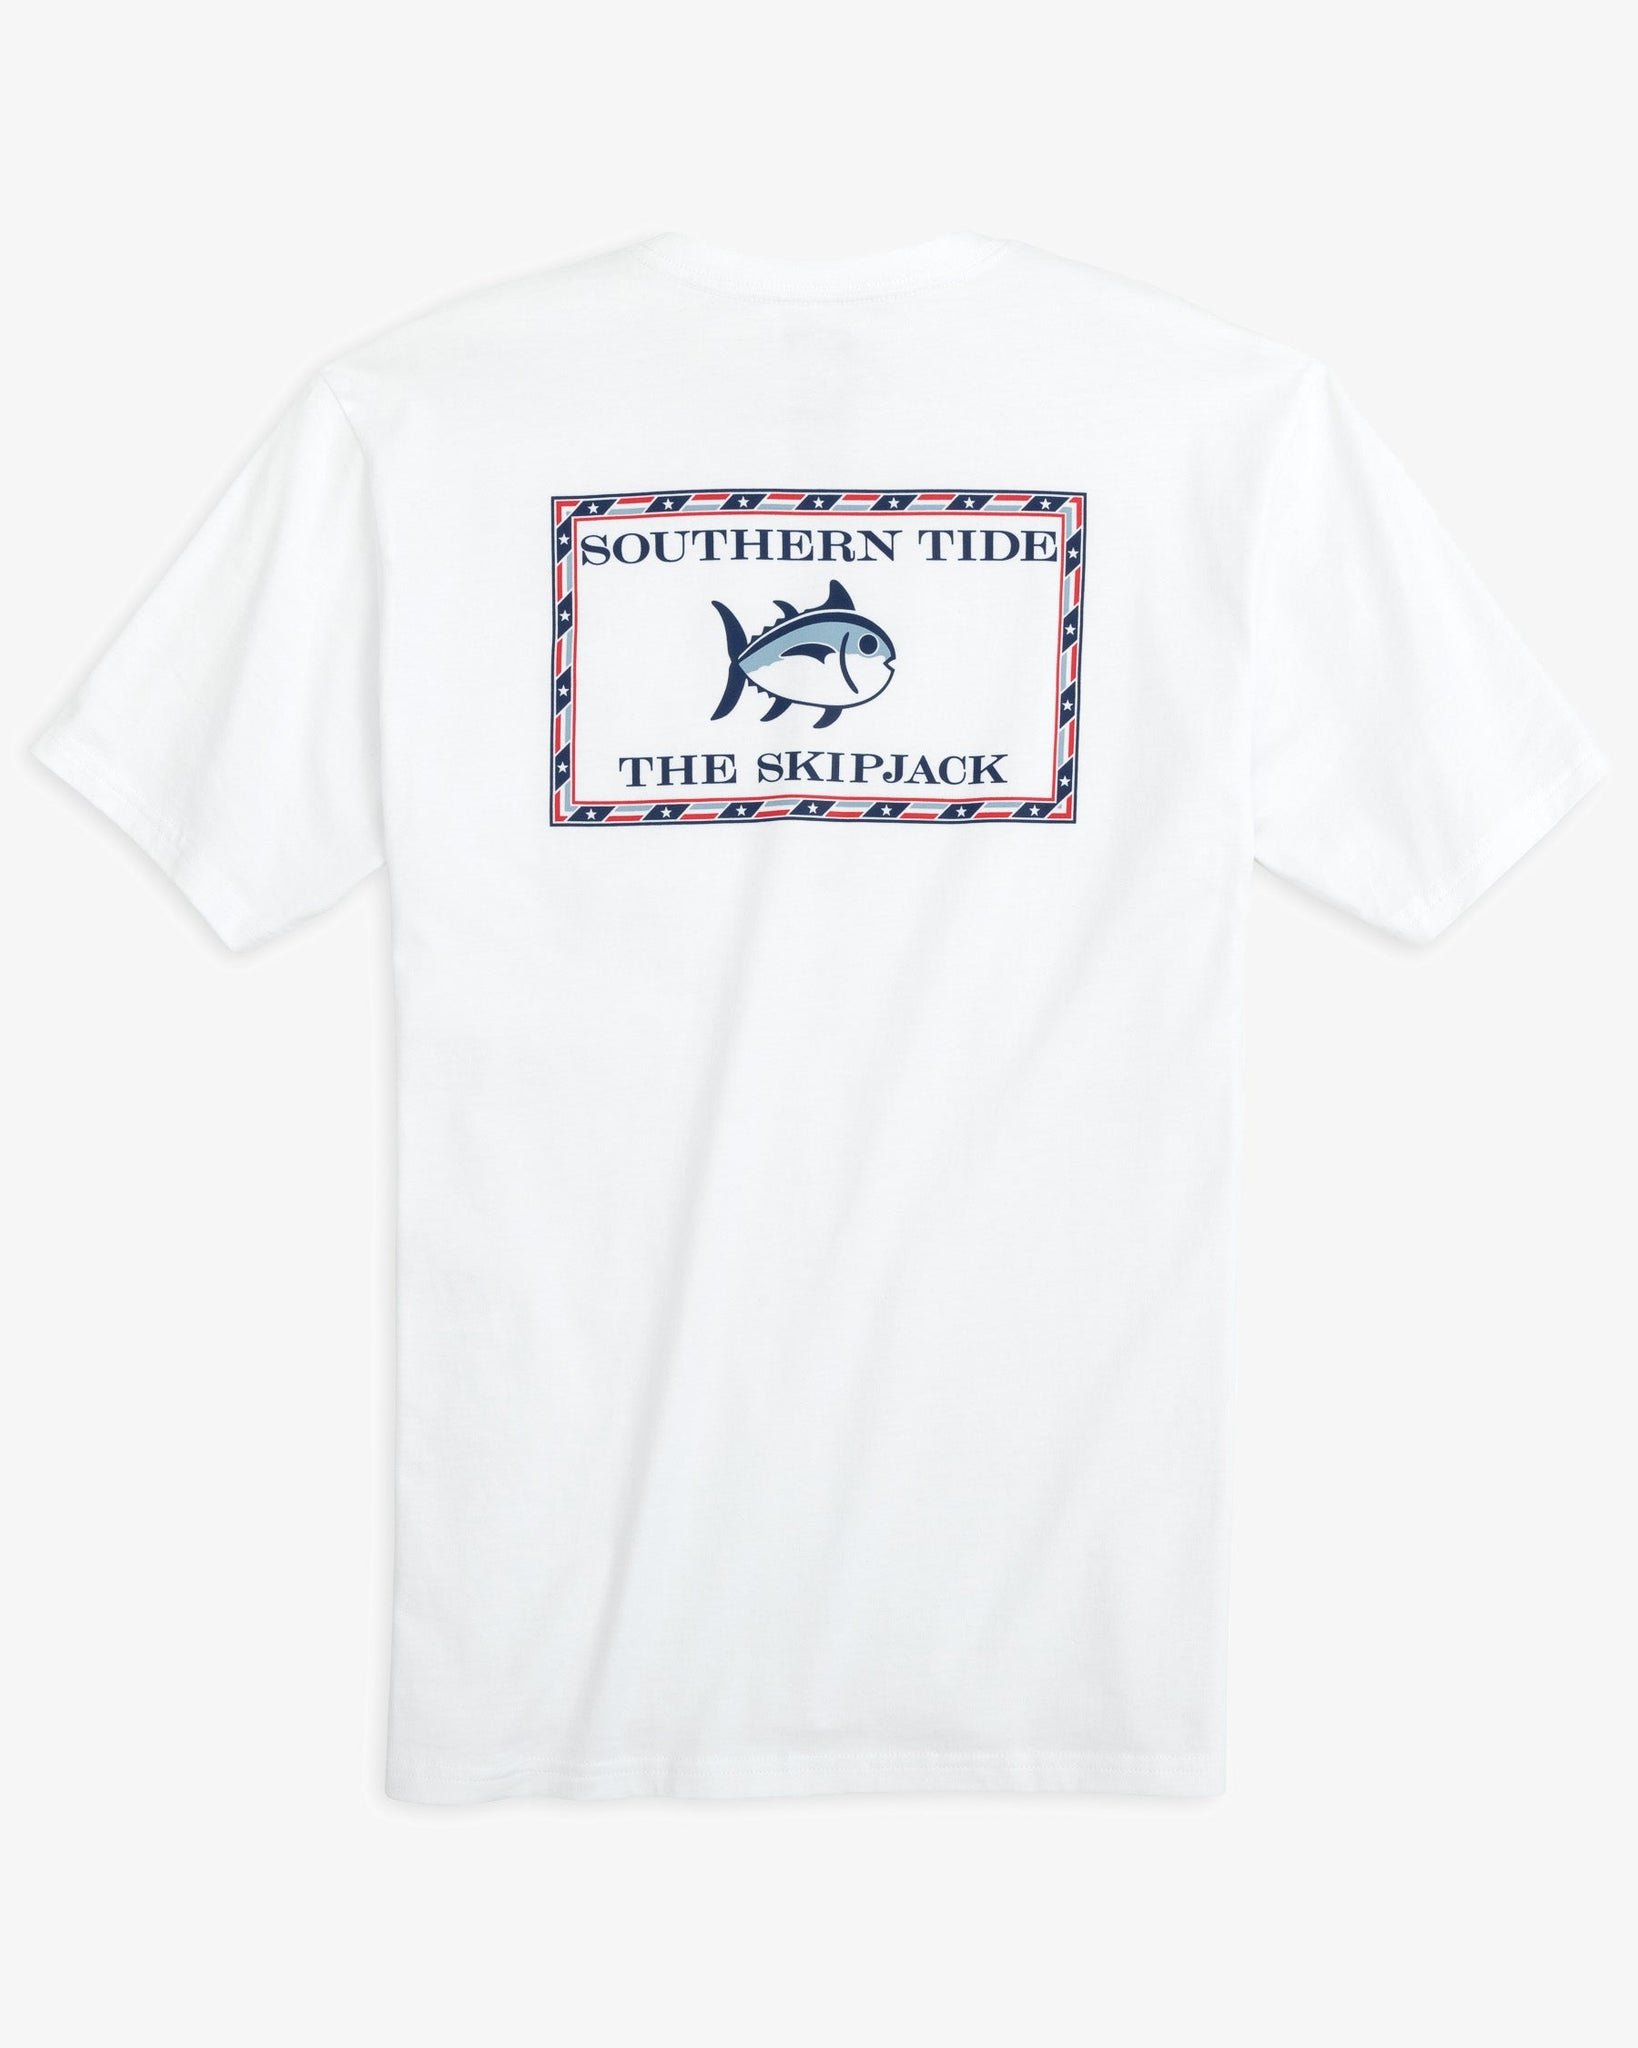 The back view of the Men's Original American Skipjack T-Shirt by Southern Tide - Classic White